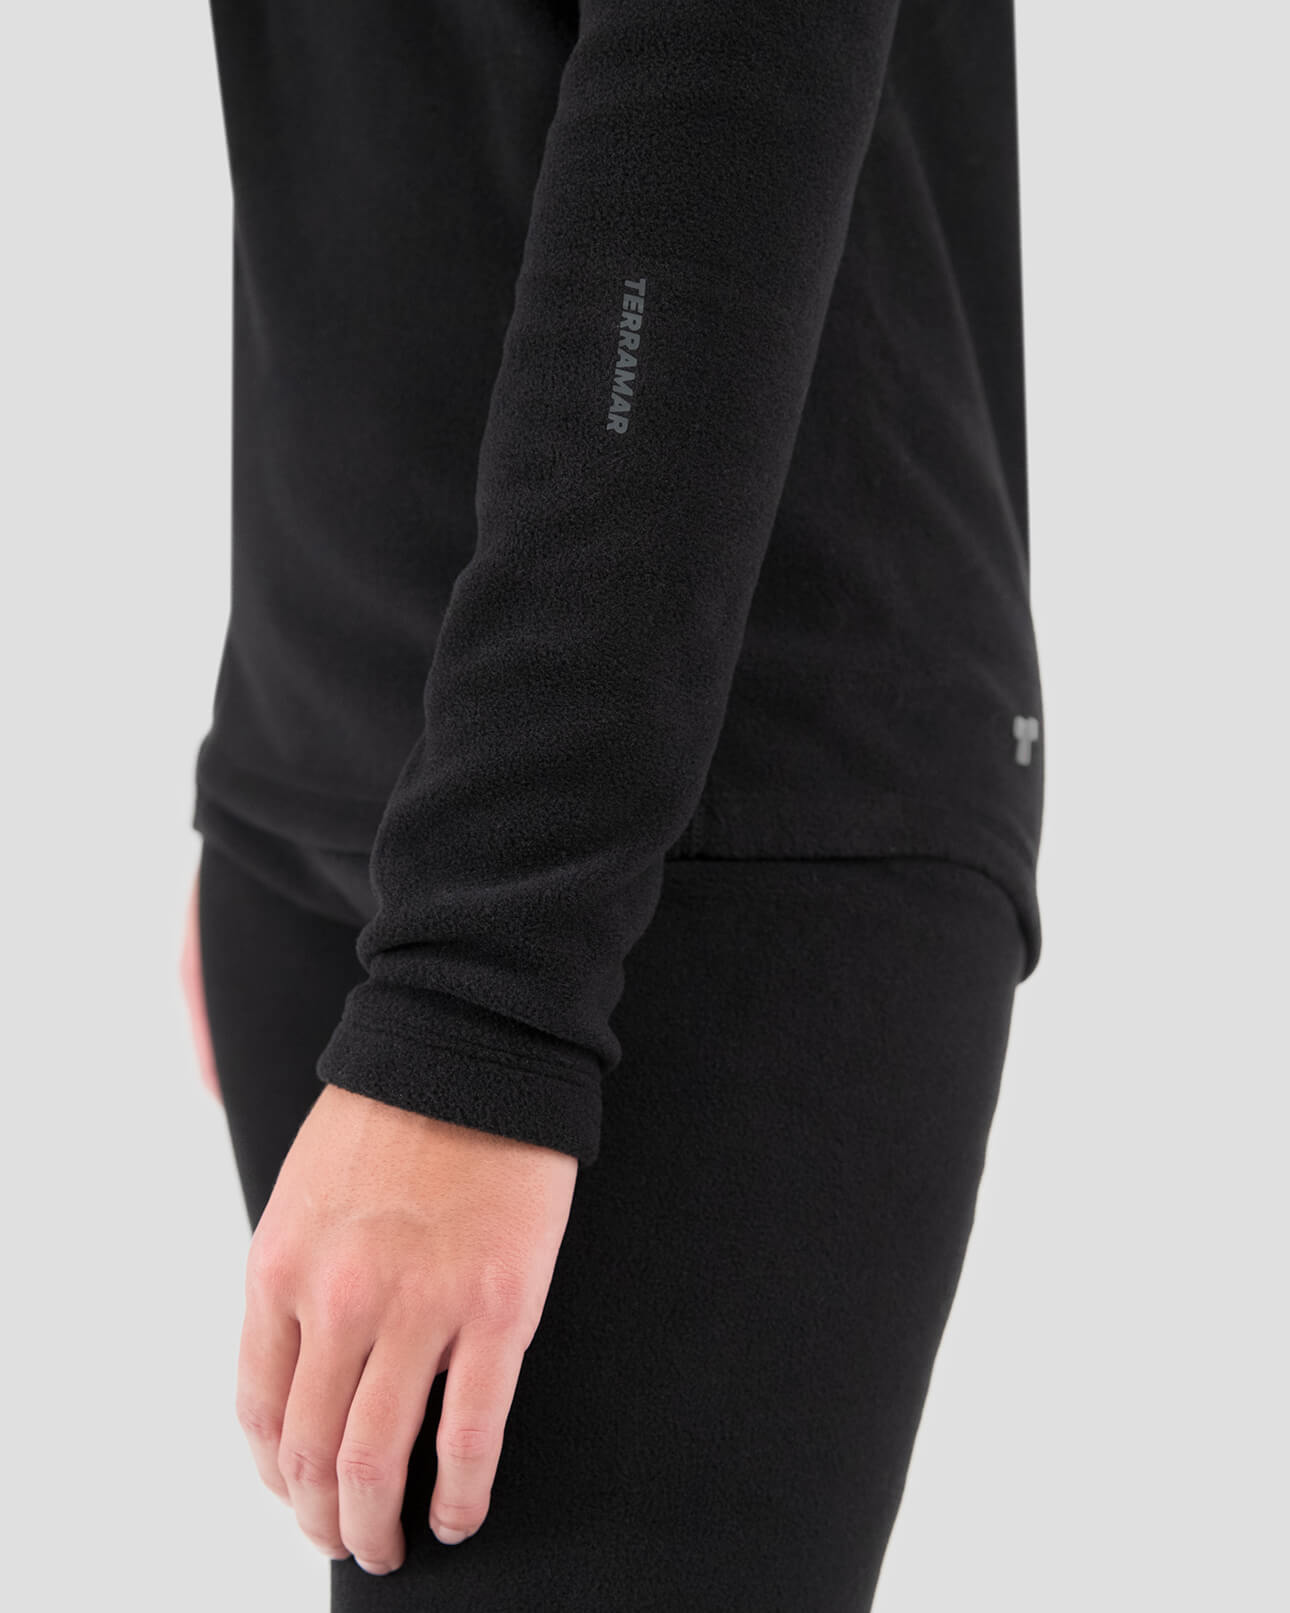 Women's Heritage Expedition Weight Fleece Thermal Crew Shirt | Color: Black